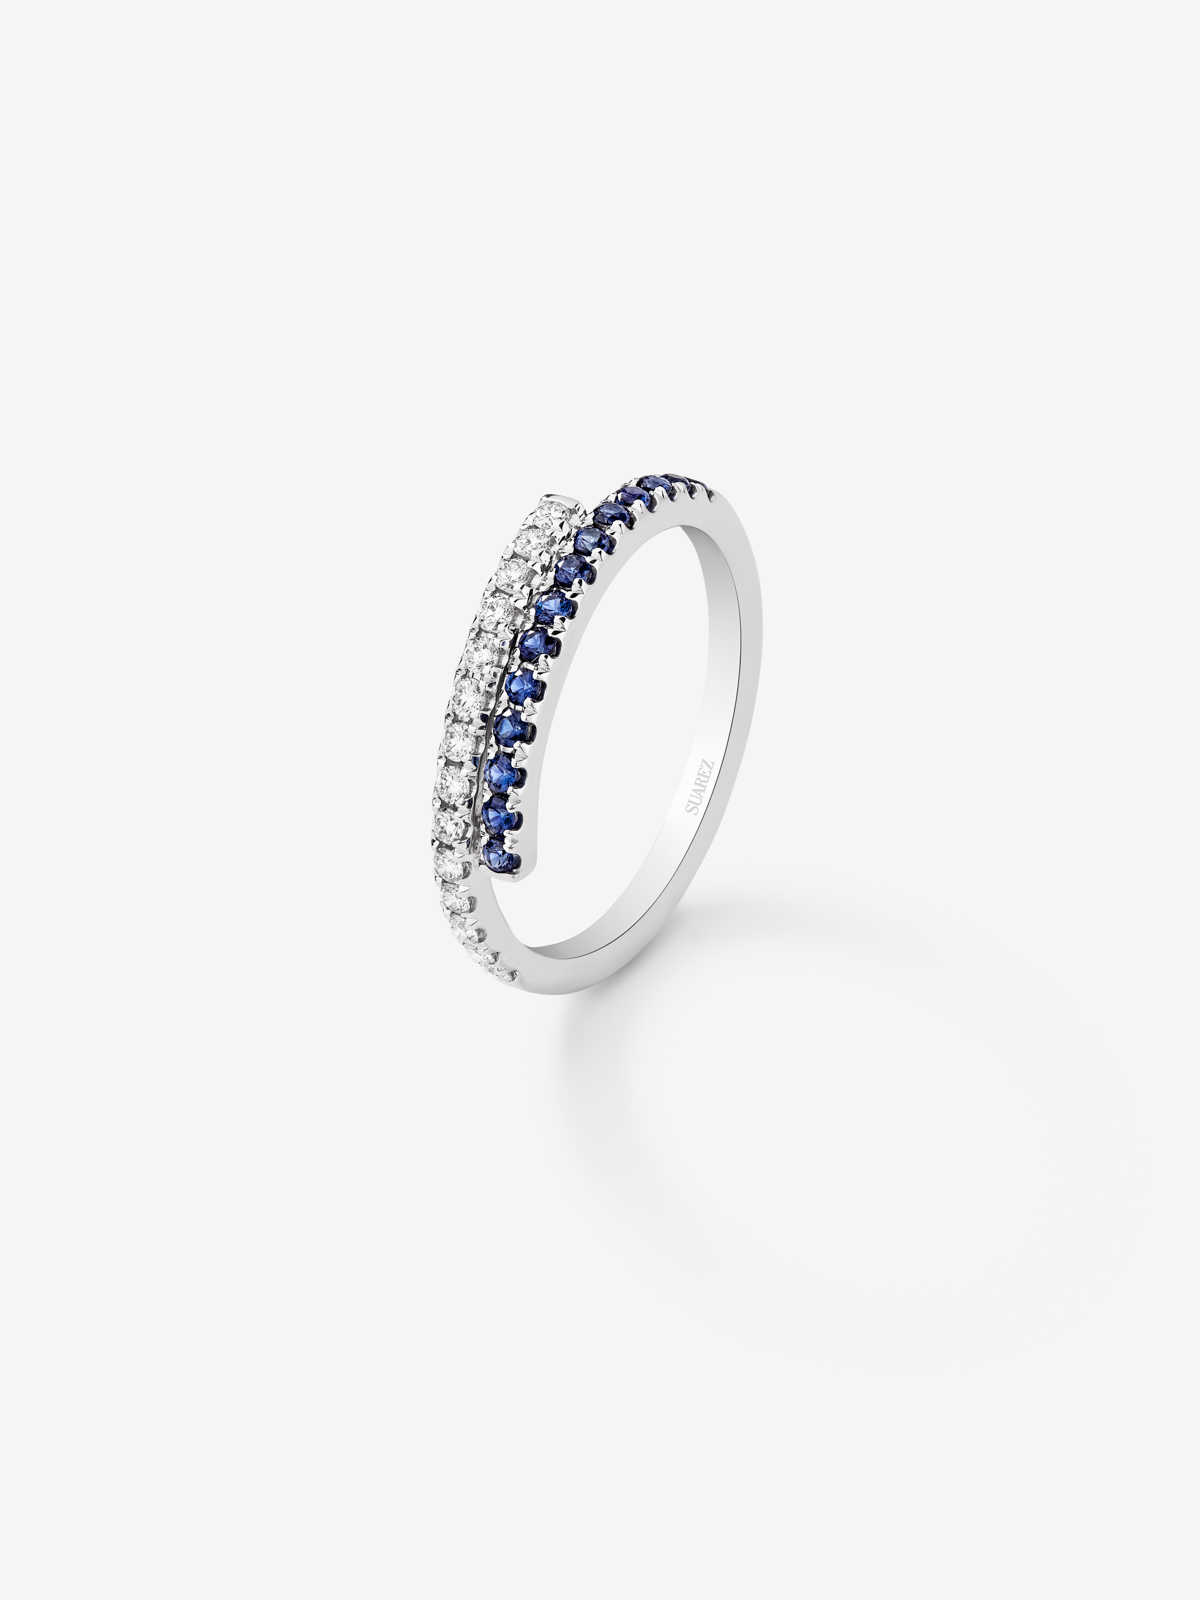 18K white gold half hoop ring with diamond and sapphire